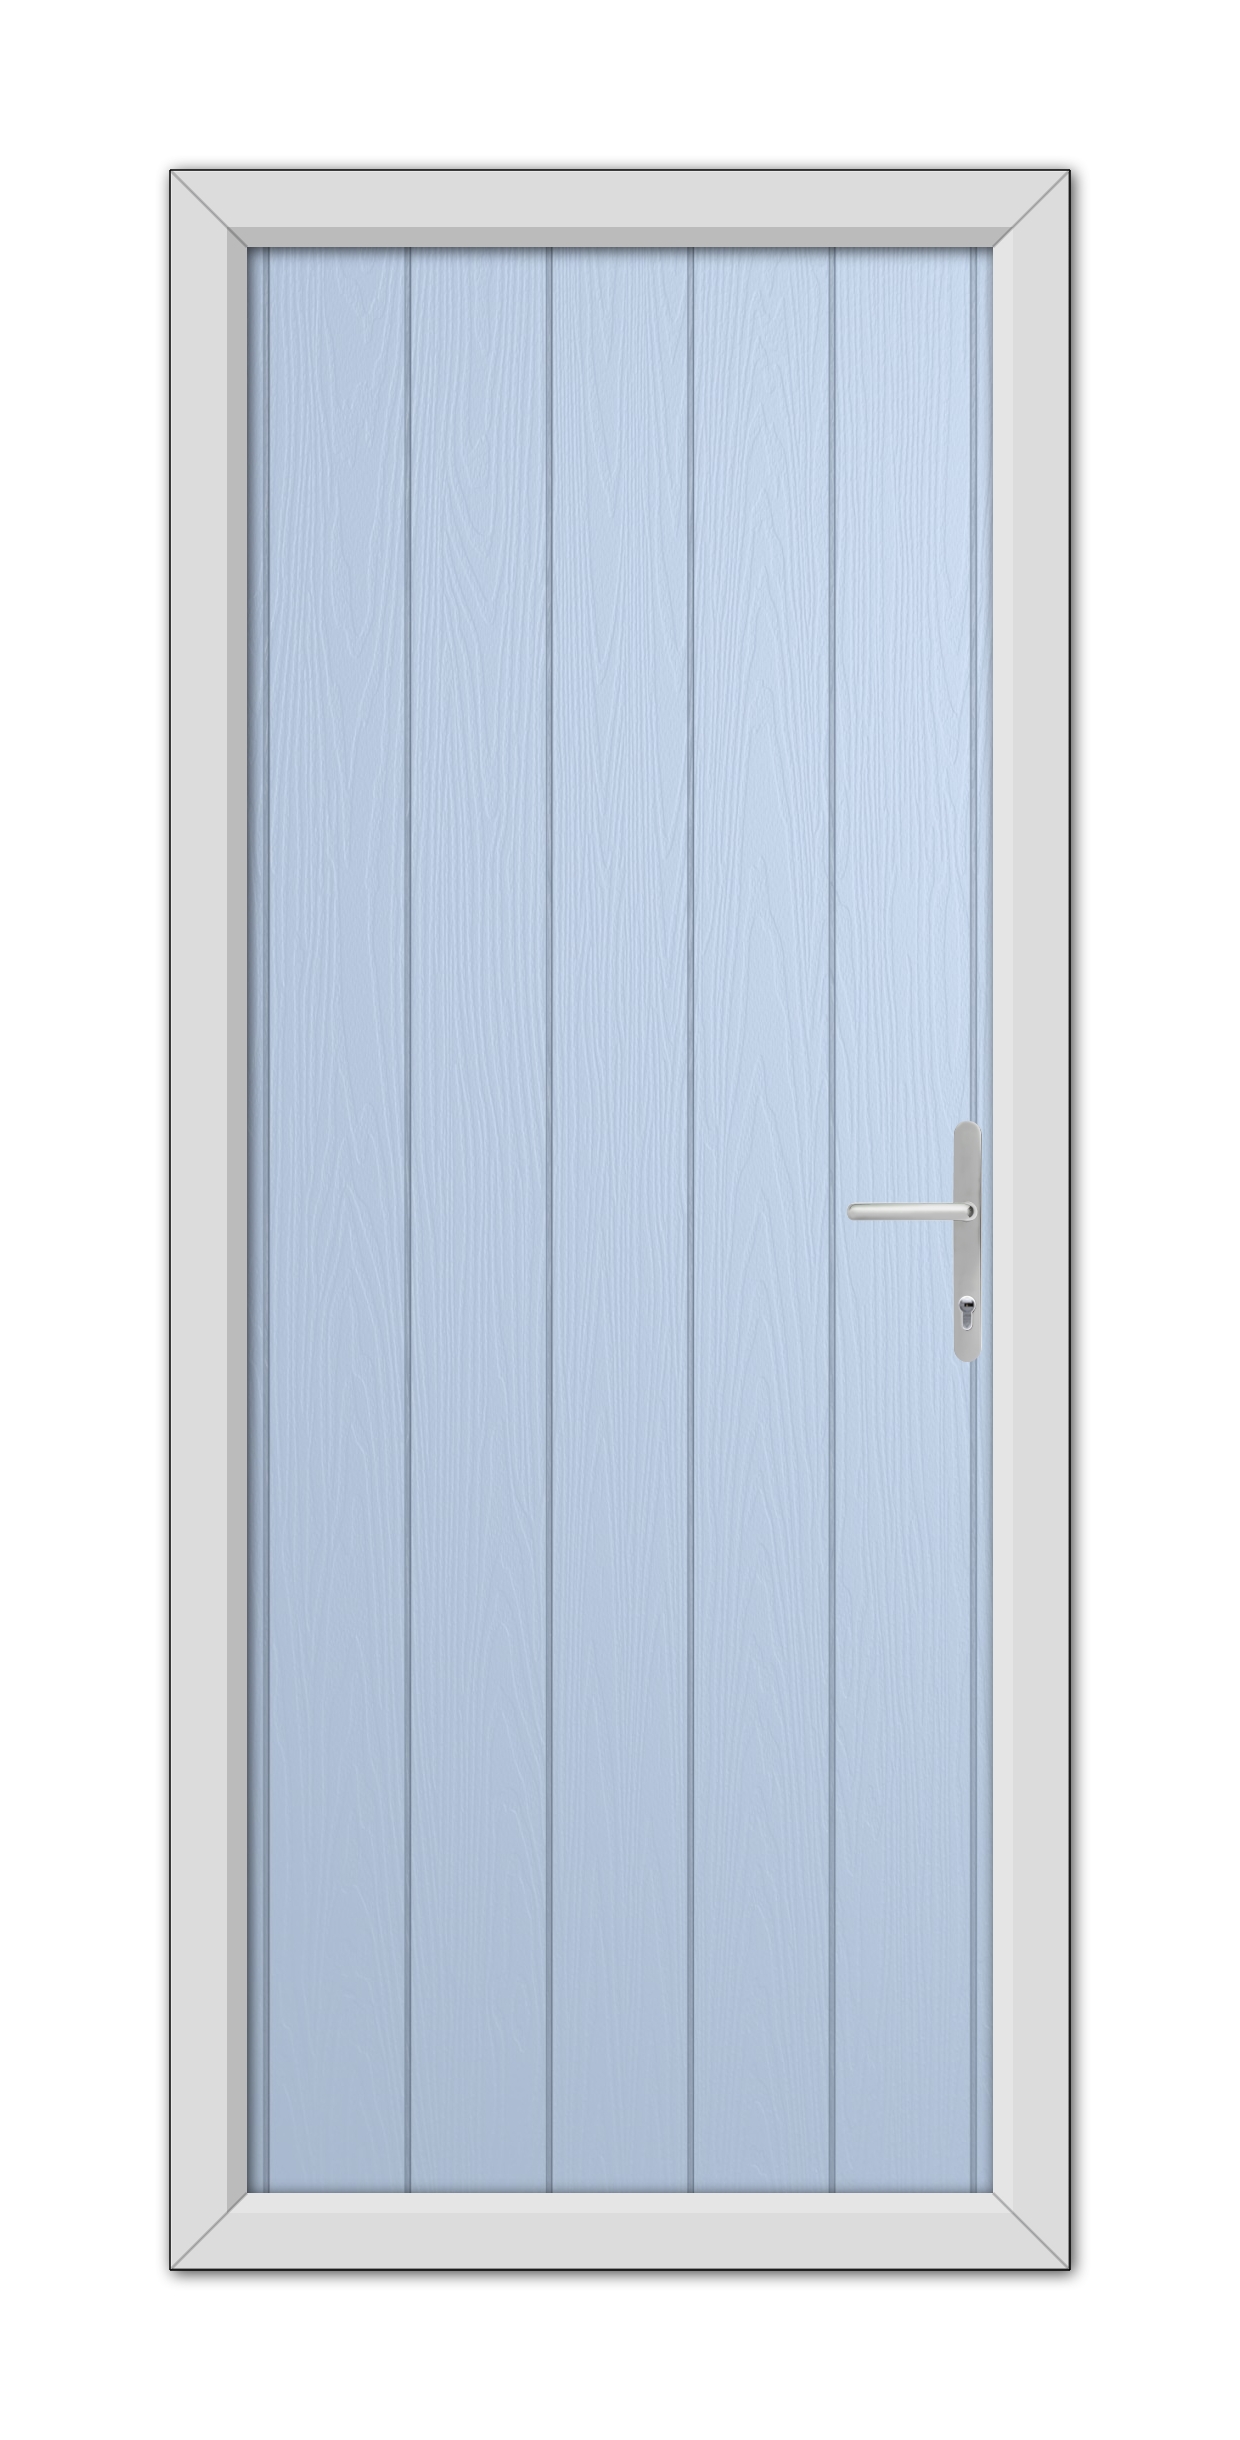 A Duck Egg Blue Gloucester Composite Door 48mm Timber Core with a silver handle, set within a white frame, depicted in a frontal view.